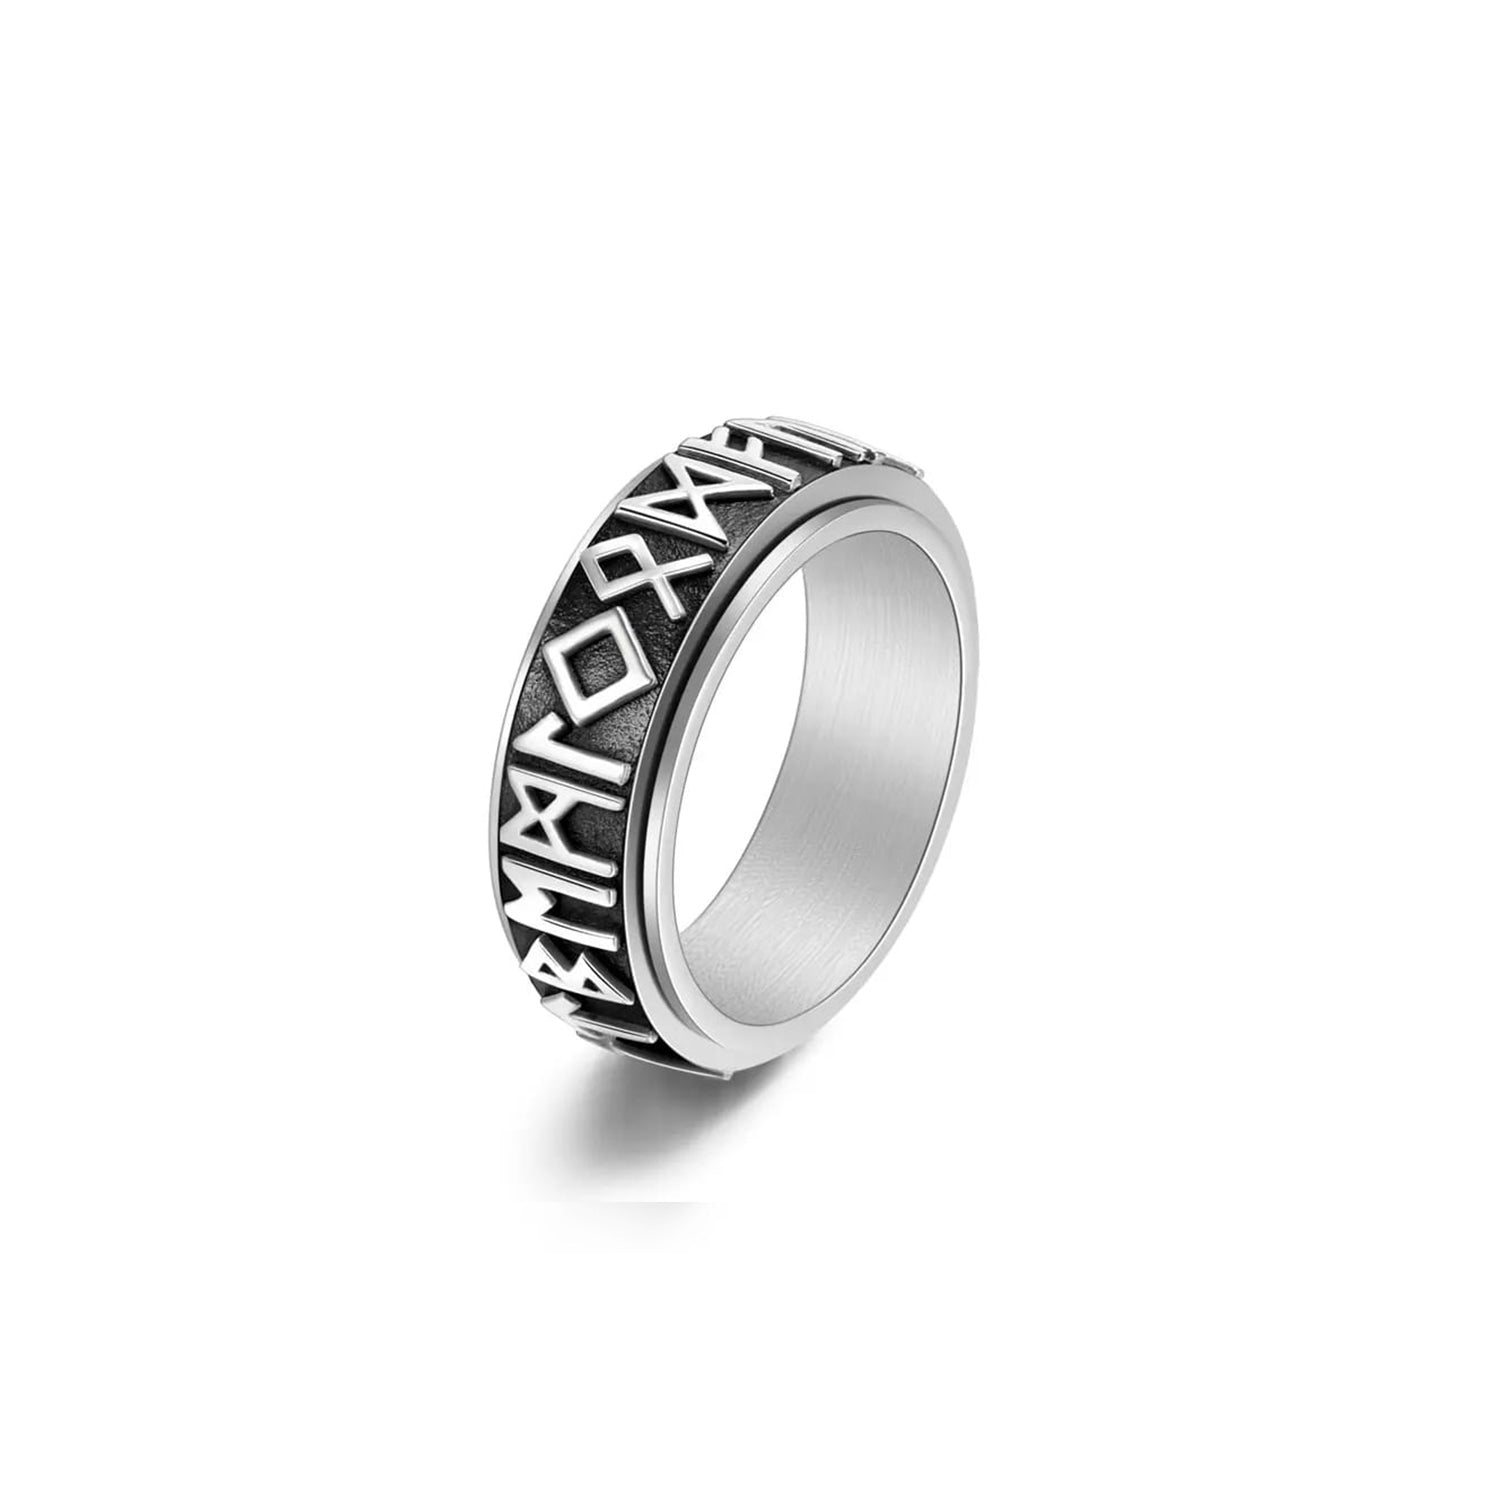 Greek Spinner Ring in oxidized finish